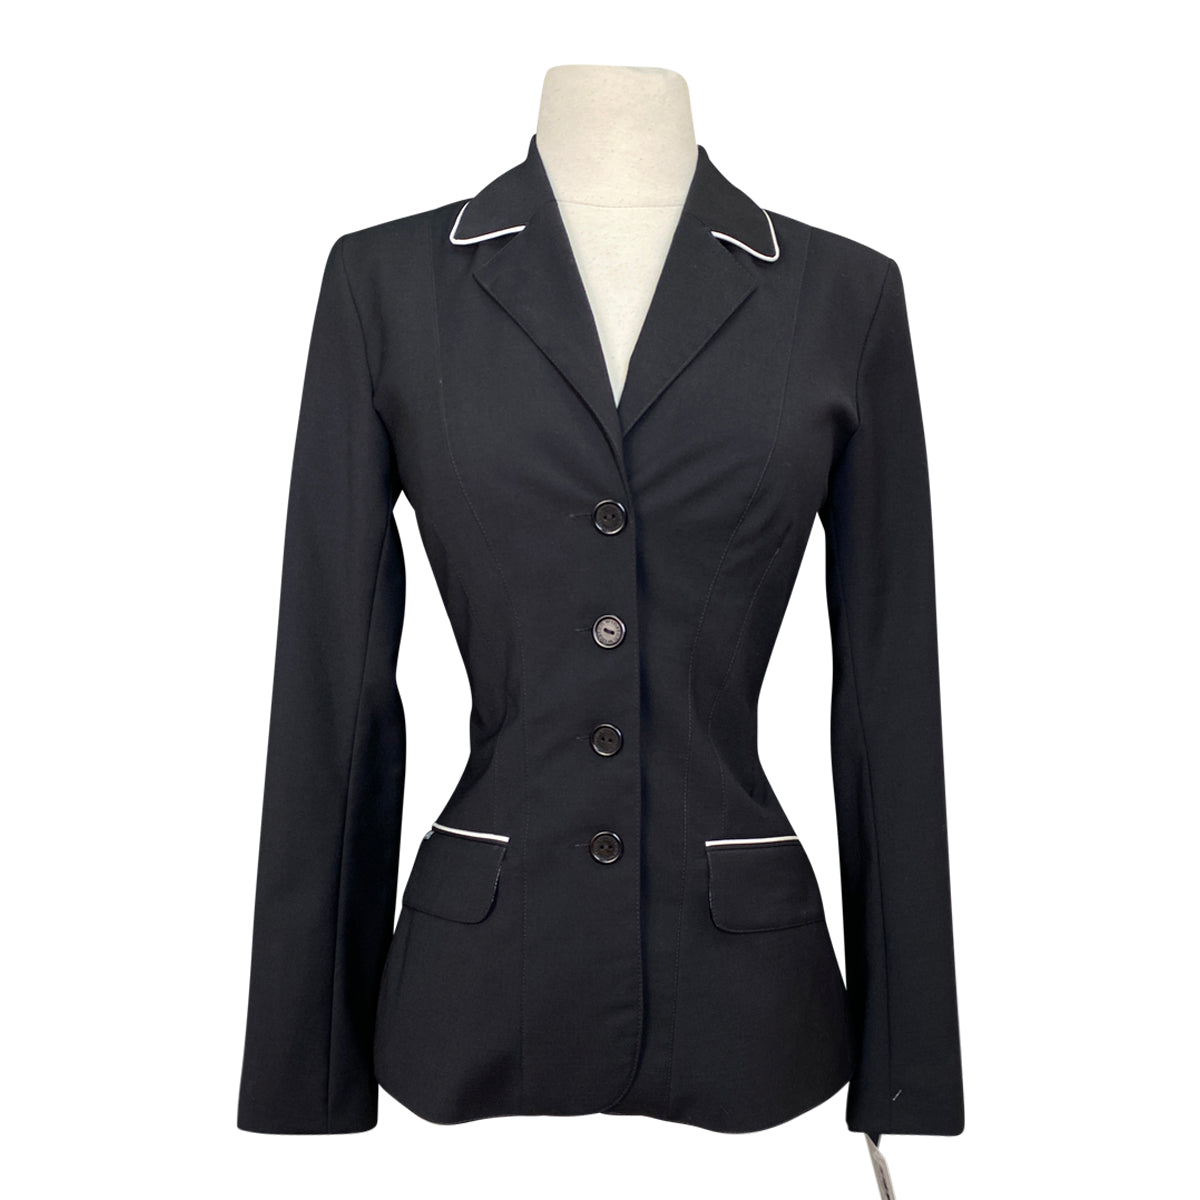 Winston Equestrian Classic Competition Coat in Black - Women&#39;s 34T (US 0/2 Tall)